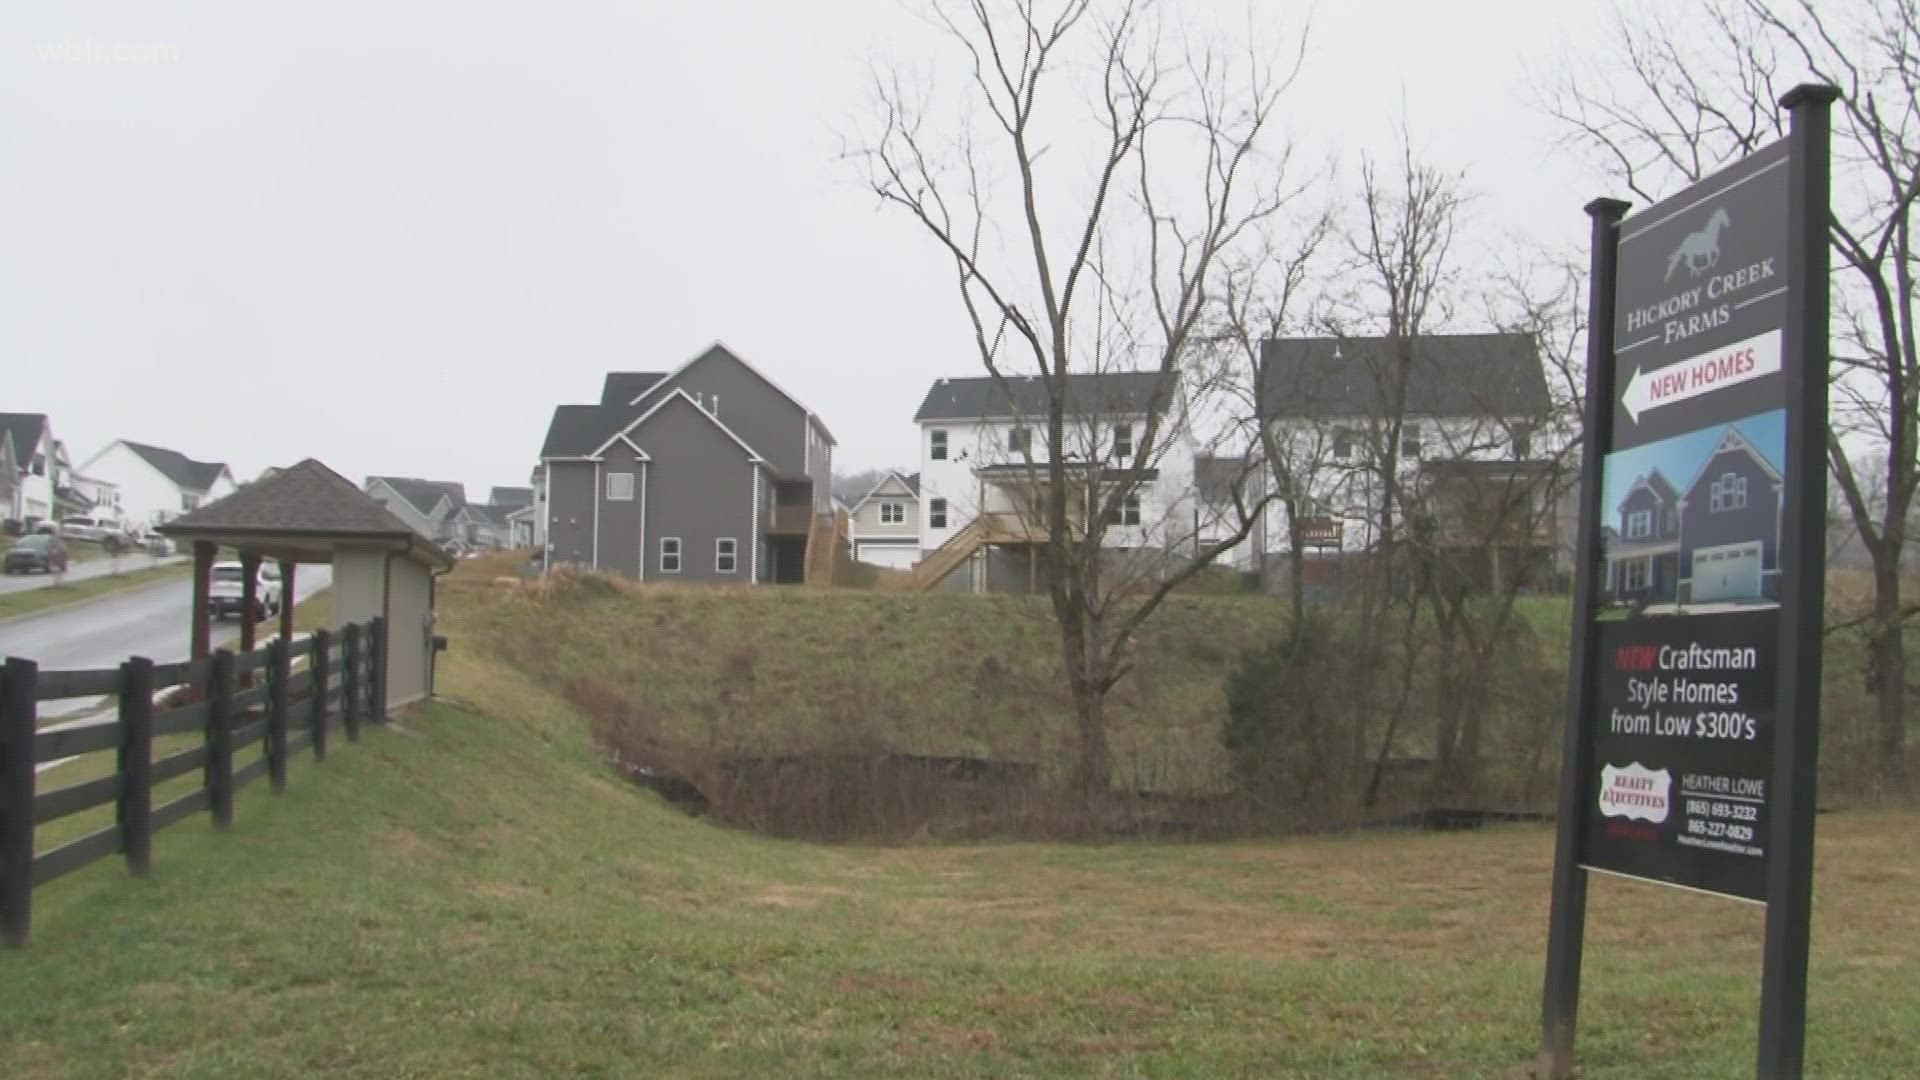 Knox County commissioners approved a rezoning plan in Hardin Valley that will pave the way for 600 new houses.